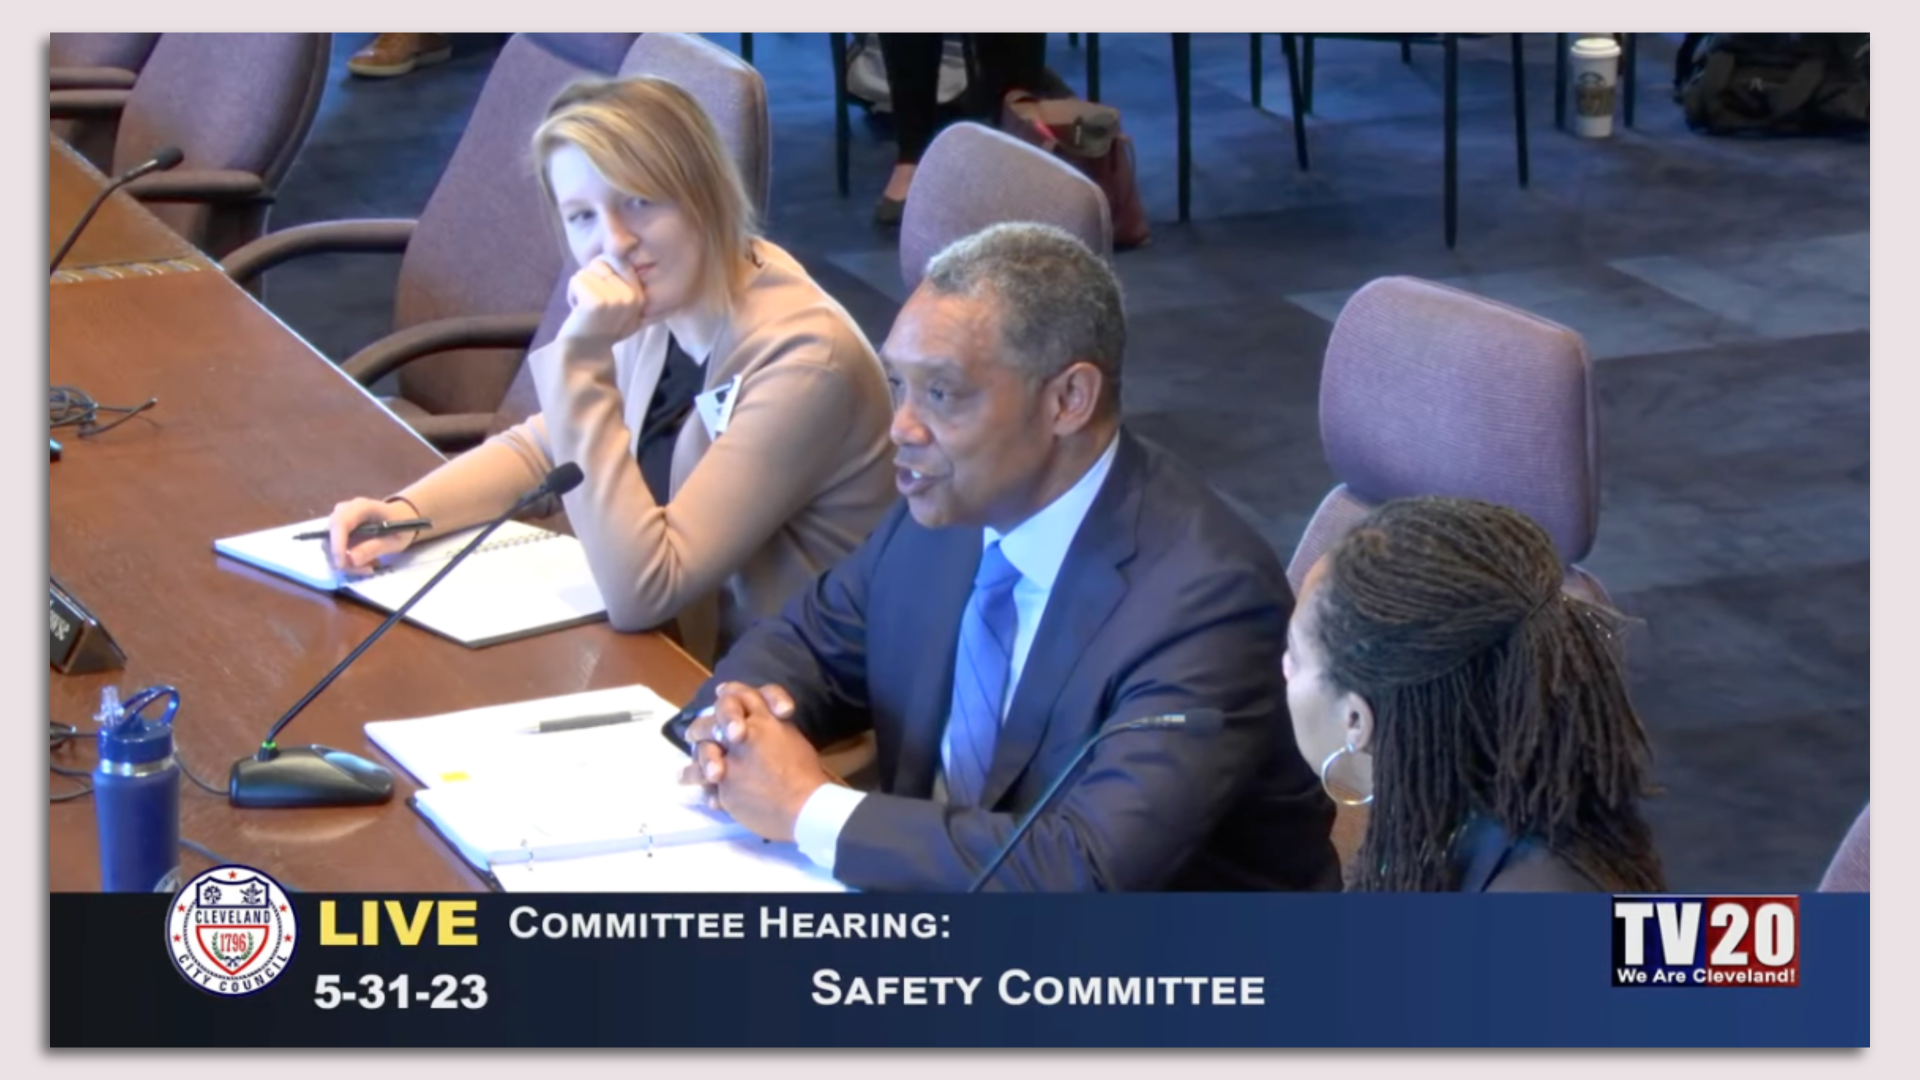 A screenshot of a live stream of a Cleveland City Council safety committee meeting, with a suited Karl Racine speaking